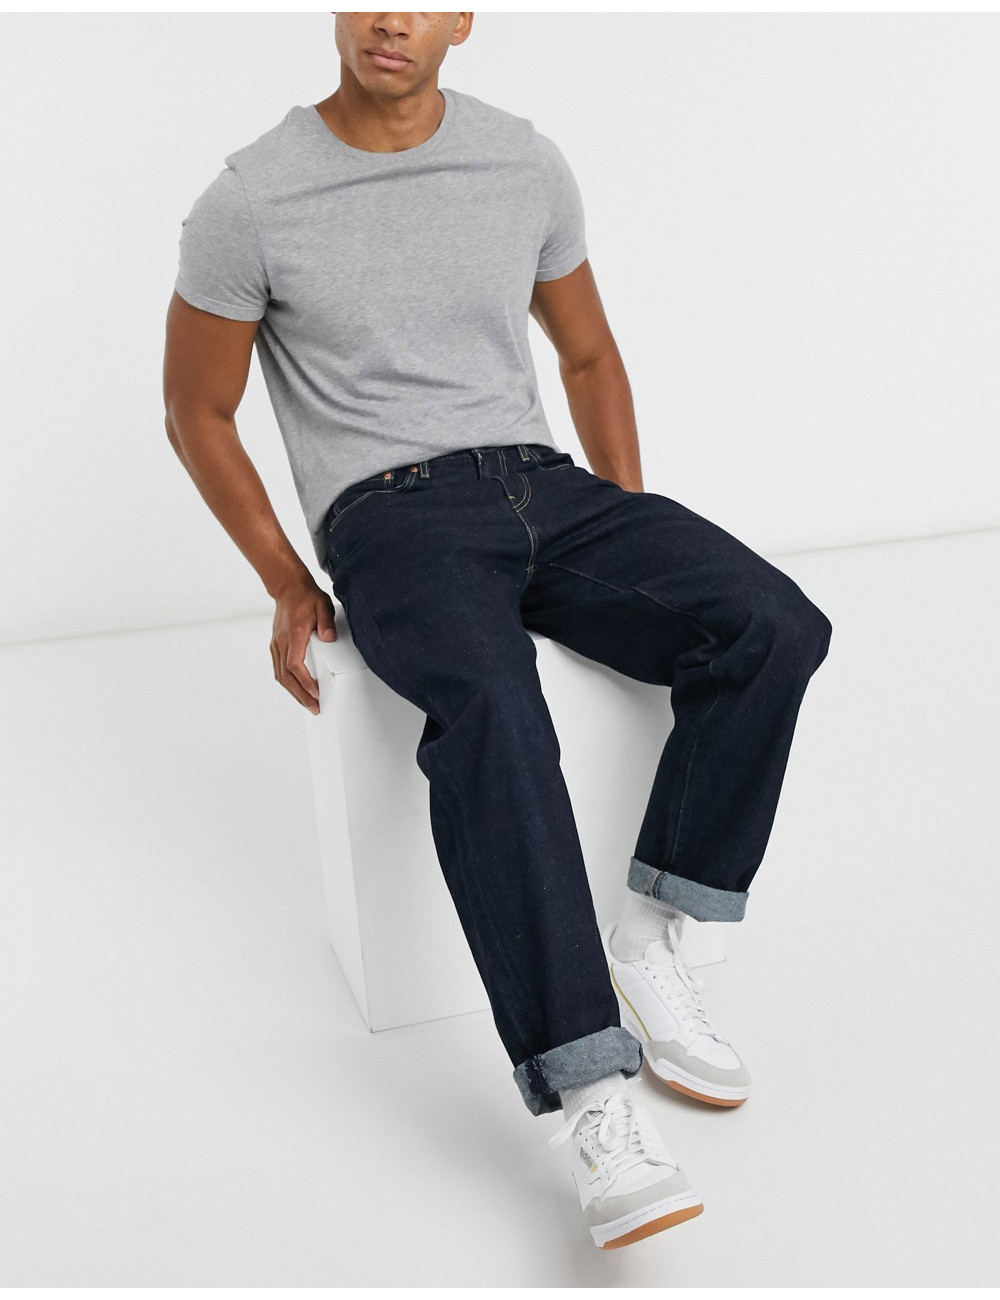 Levi's stay loose fit jeans...